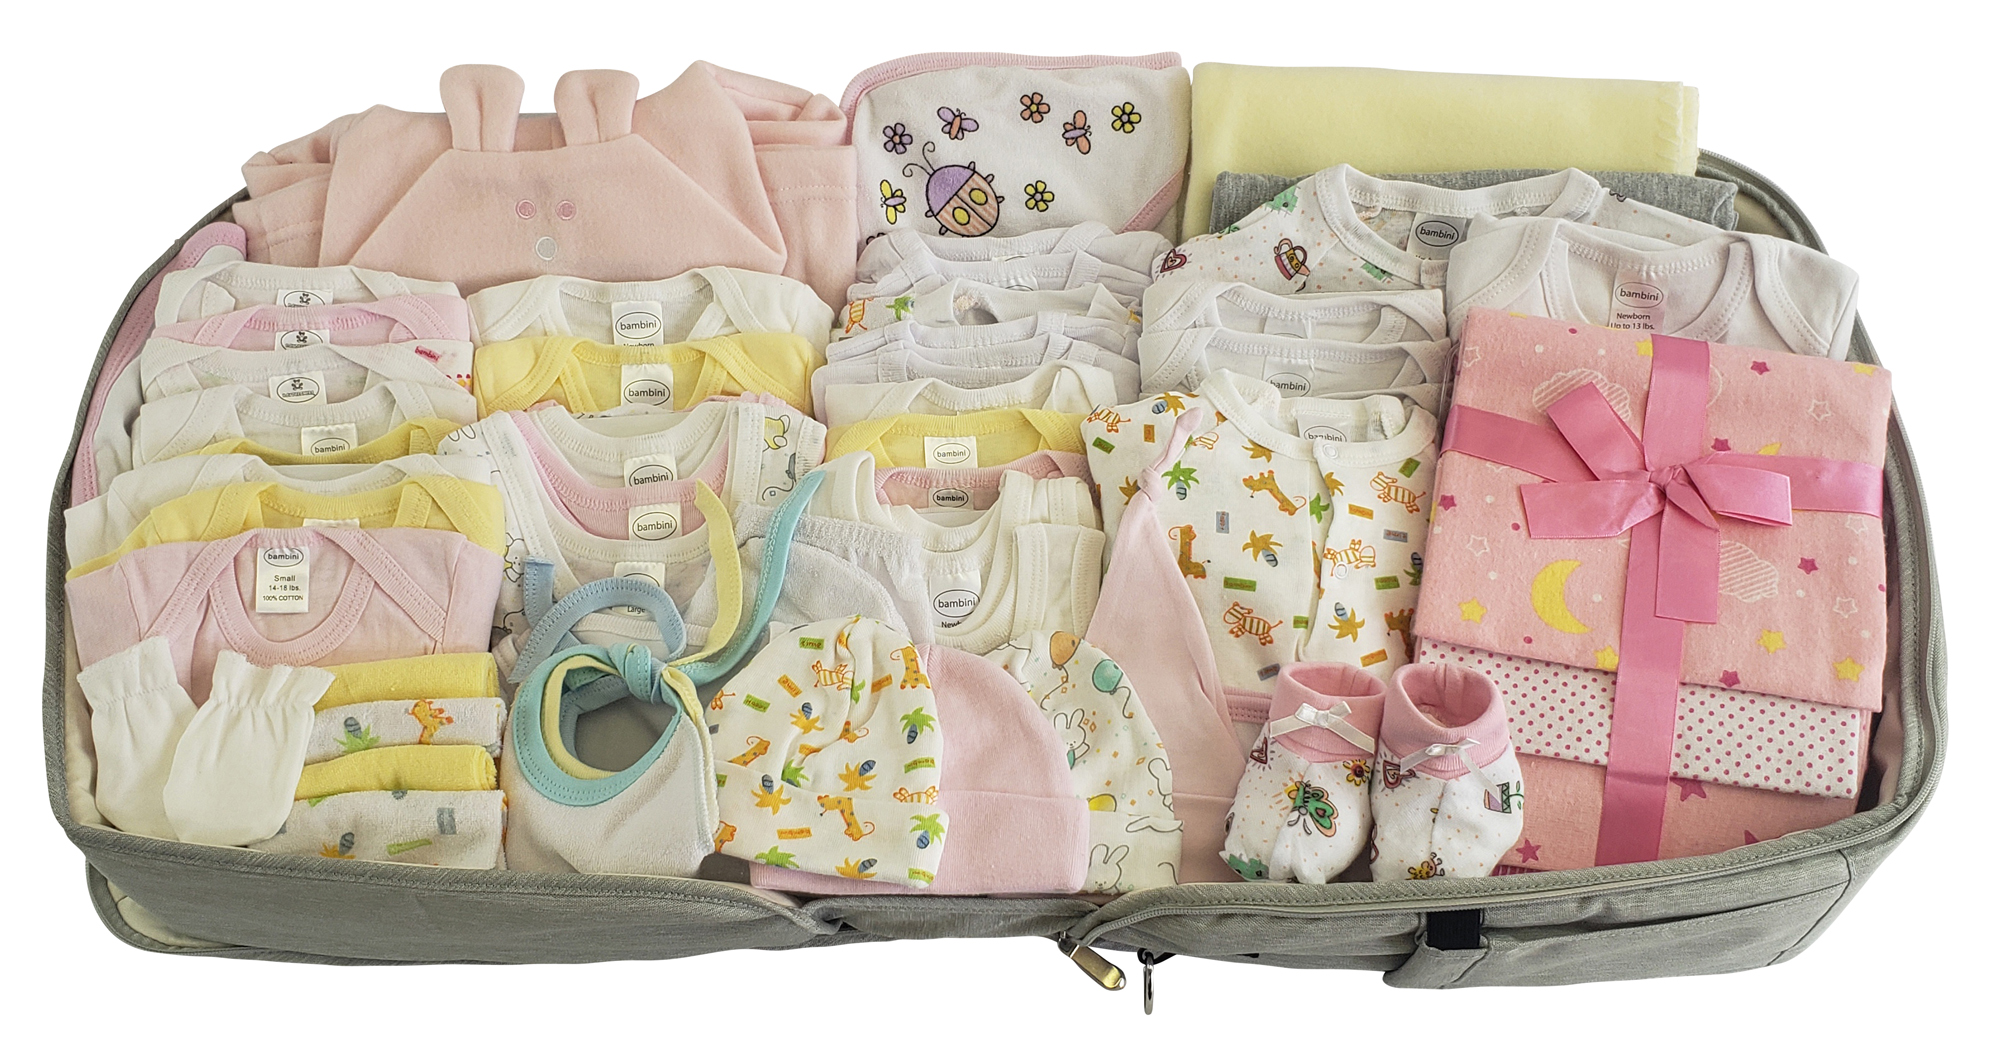 62 pc Baby Girls Clothing Starter Set with All-in-one Portable Bassinet Foldable Baby Bed, Travel Crib Infant and Diaper Bag Changing Station - image 1 of 2